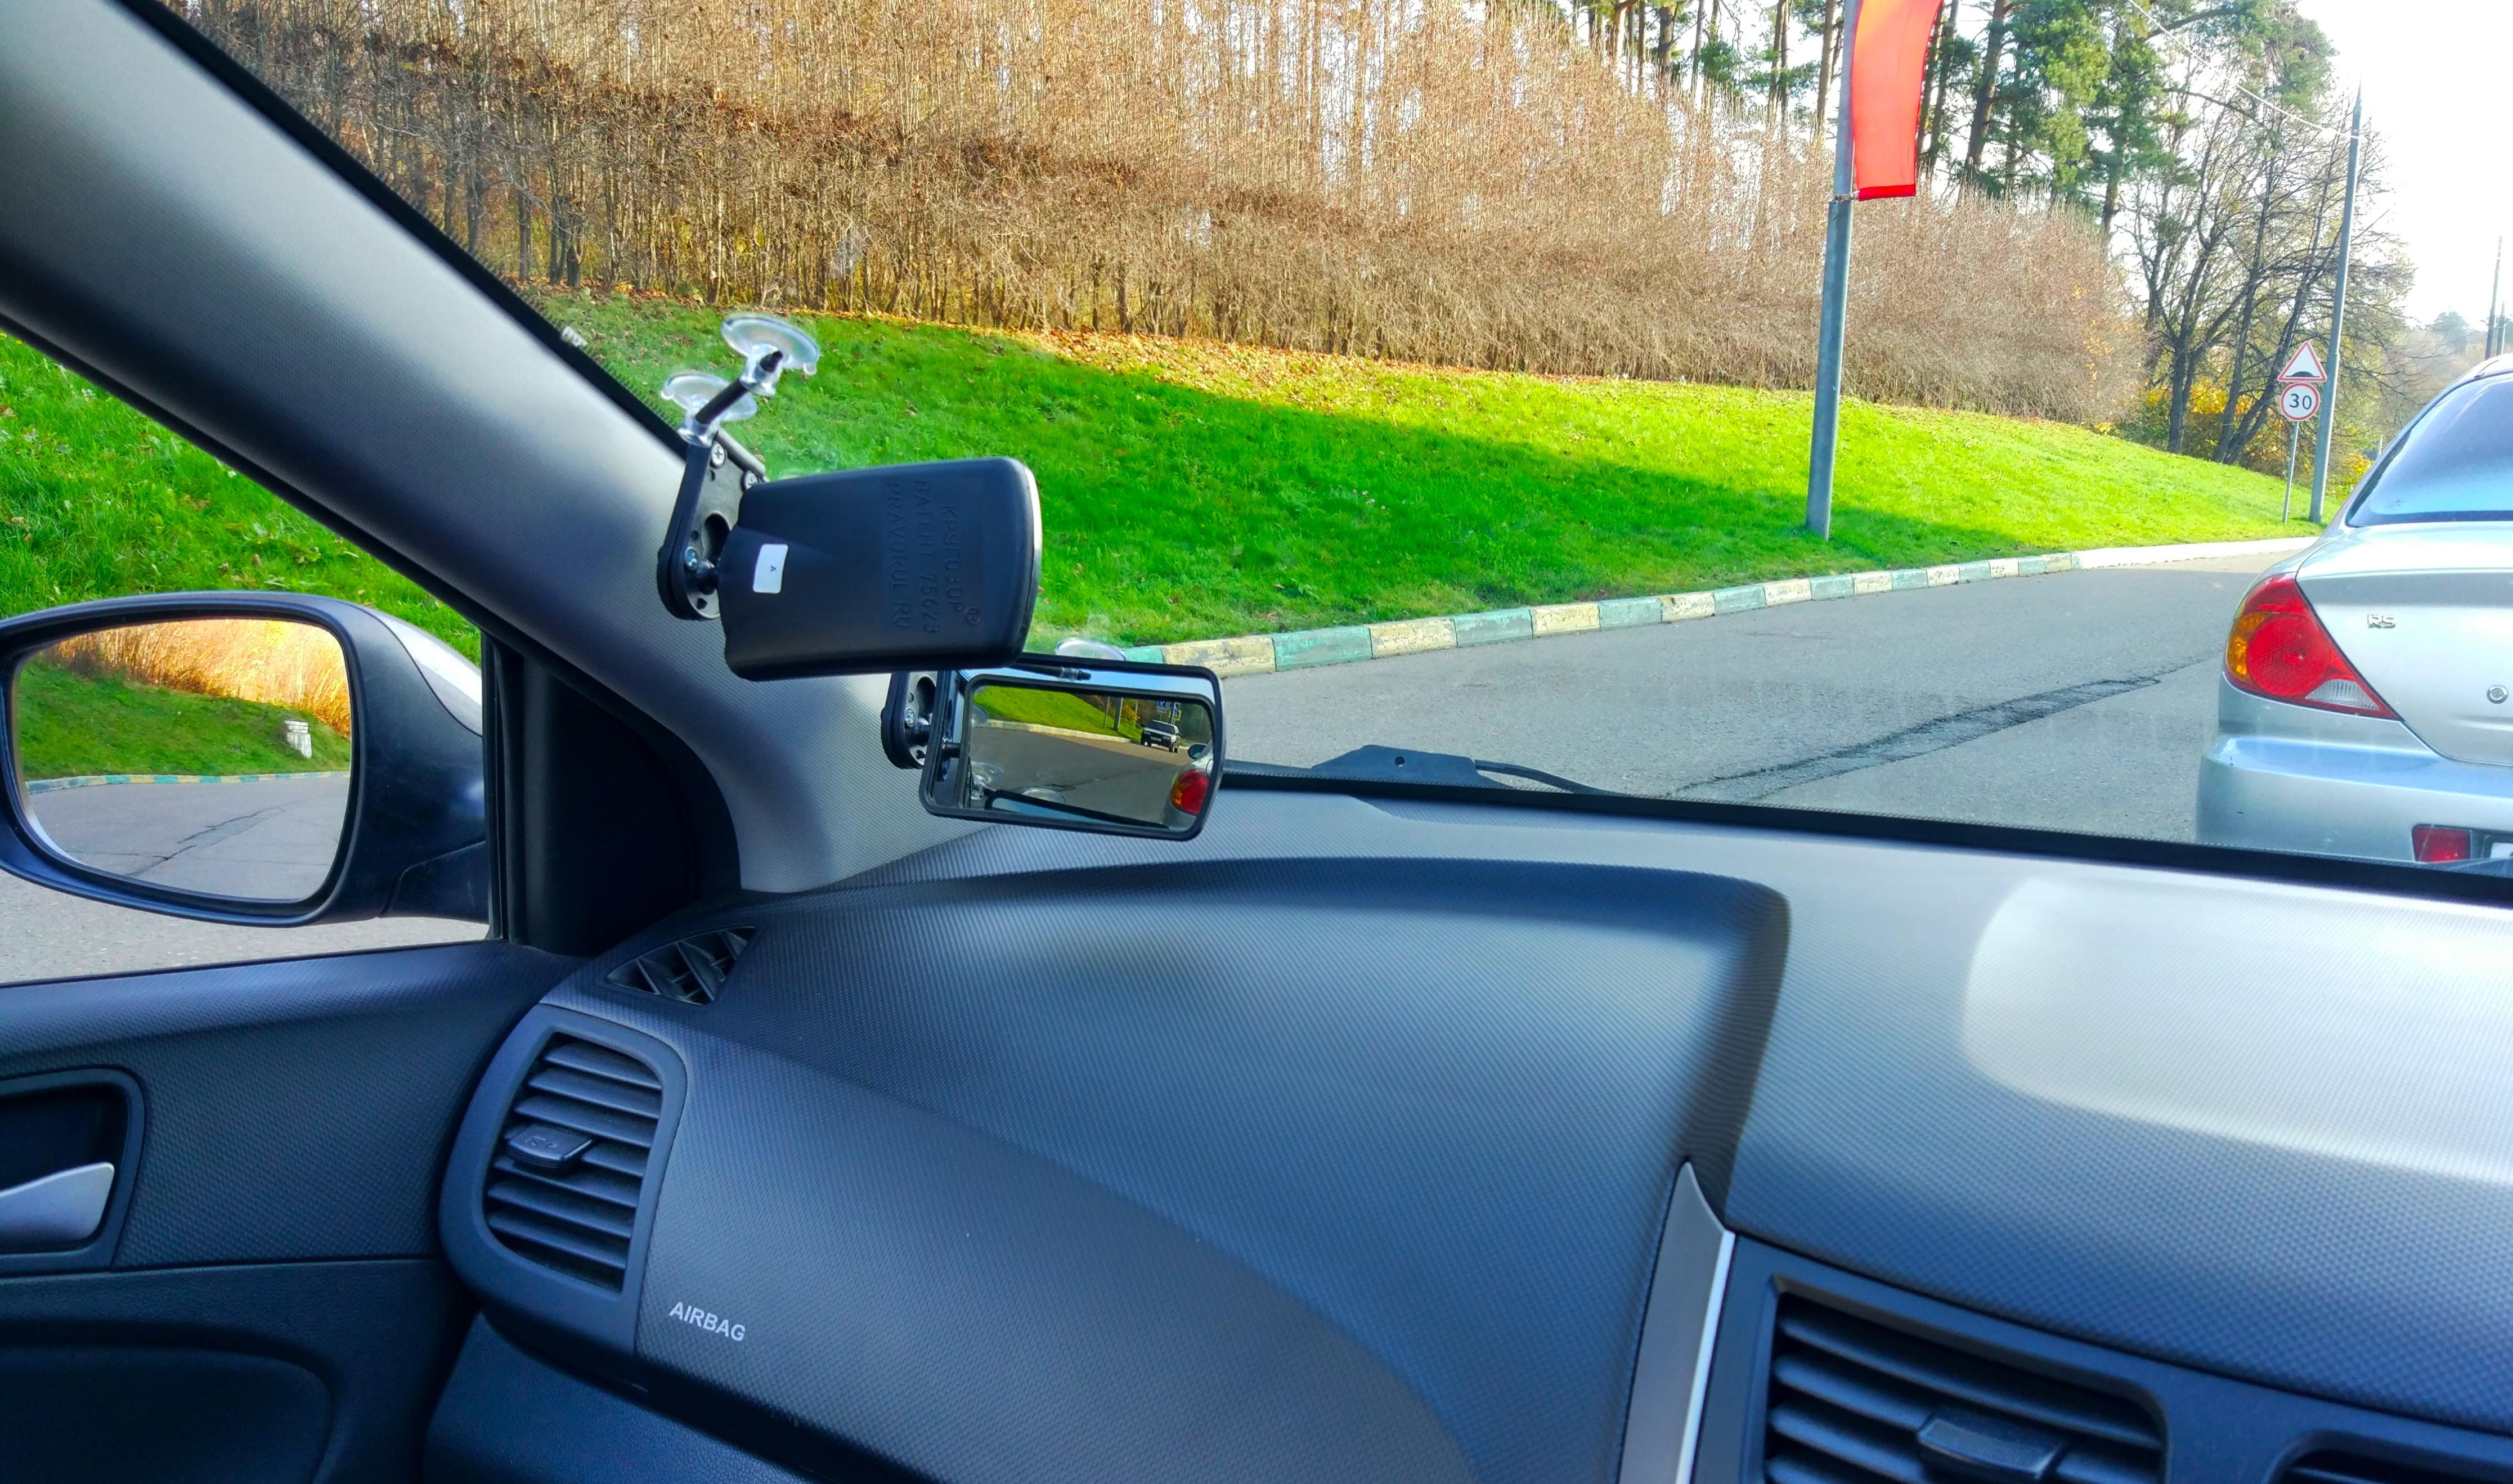 Car mirrors Krugozor 63021 for overtaking on right-hand cars - Price  history & Review, AliExpress Seller - OOOStrelets Store